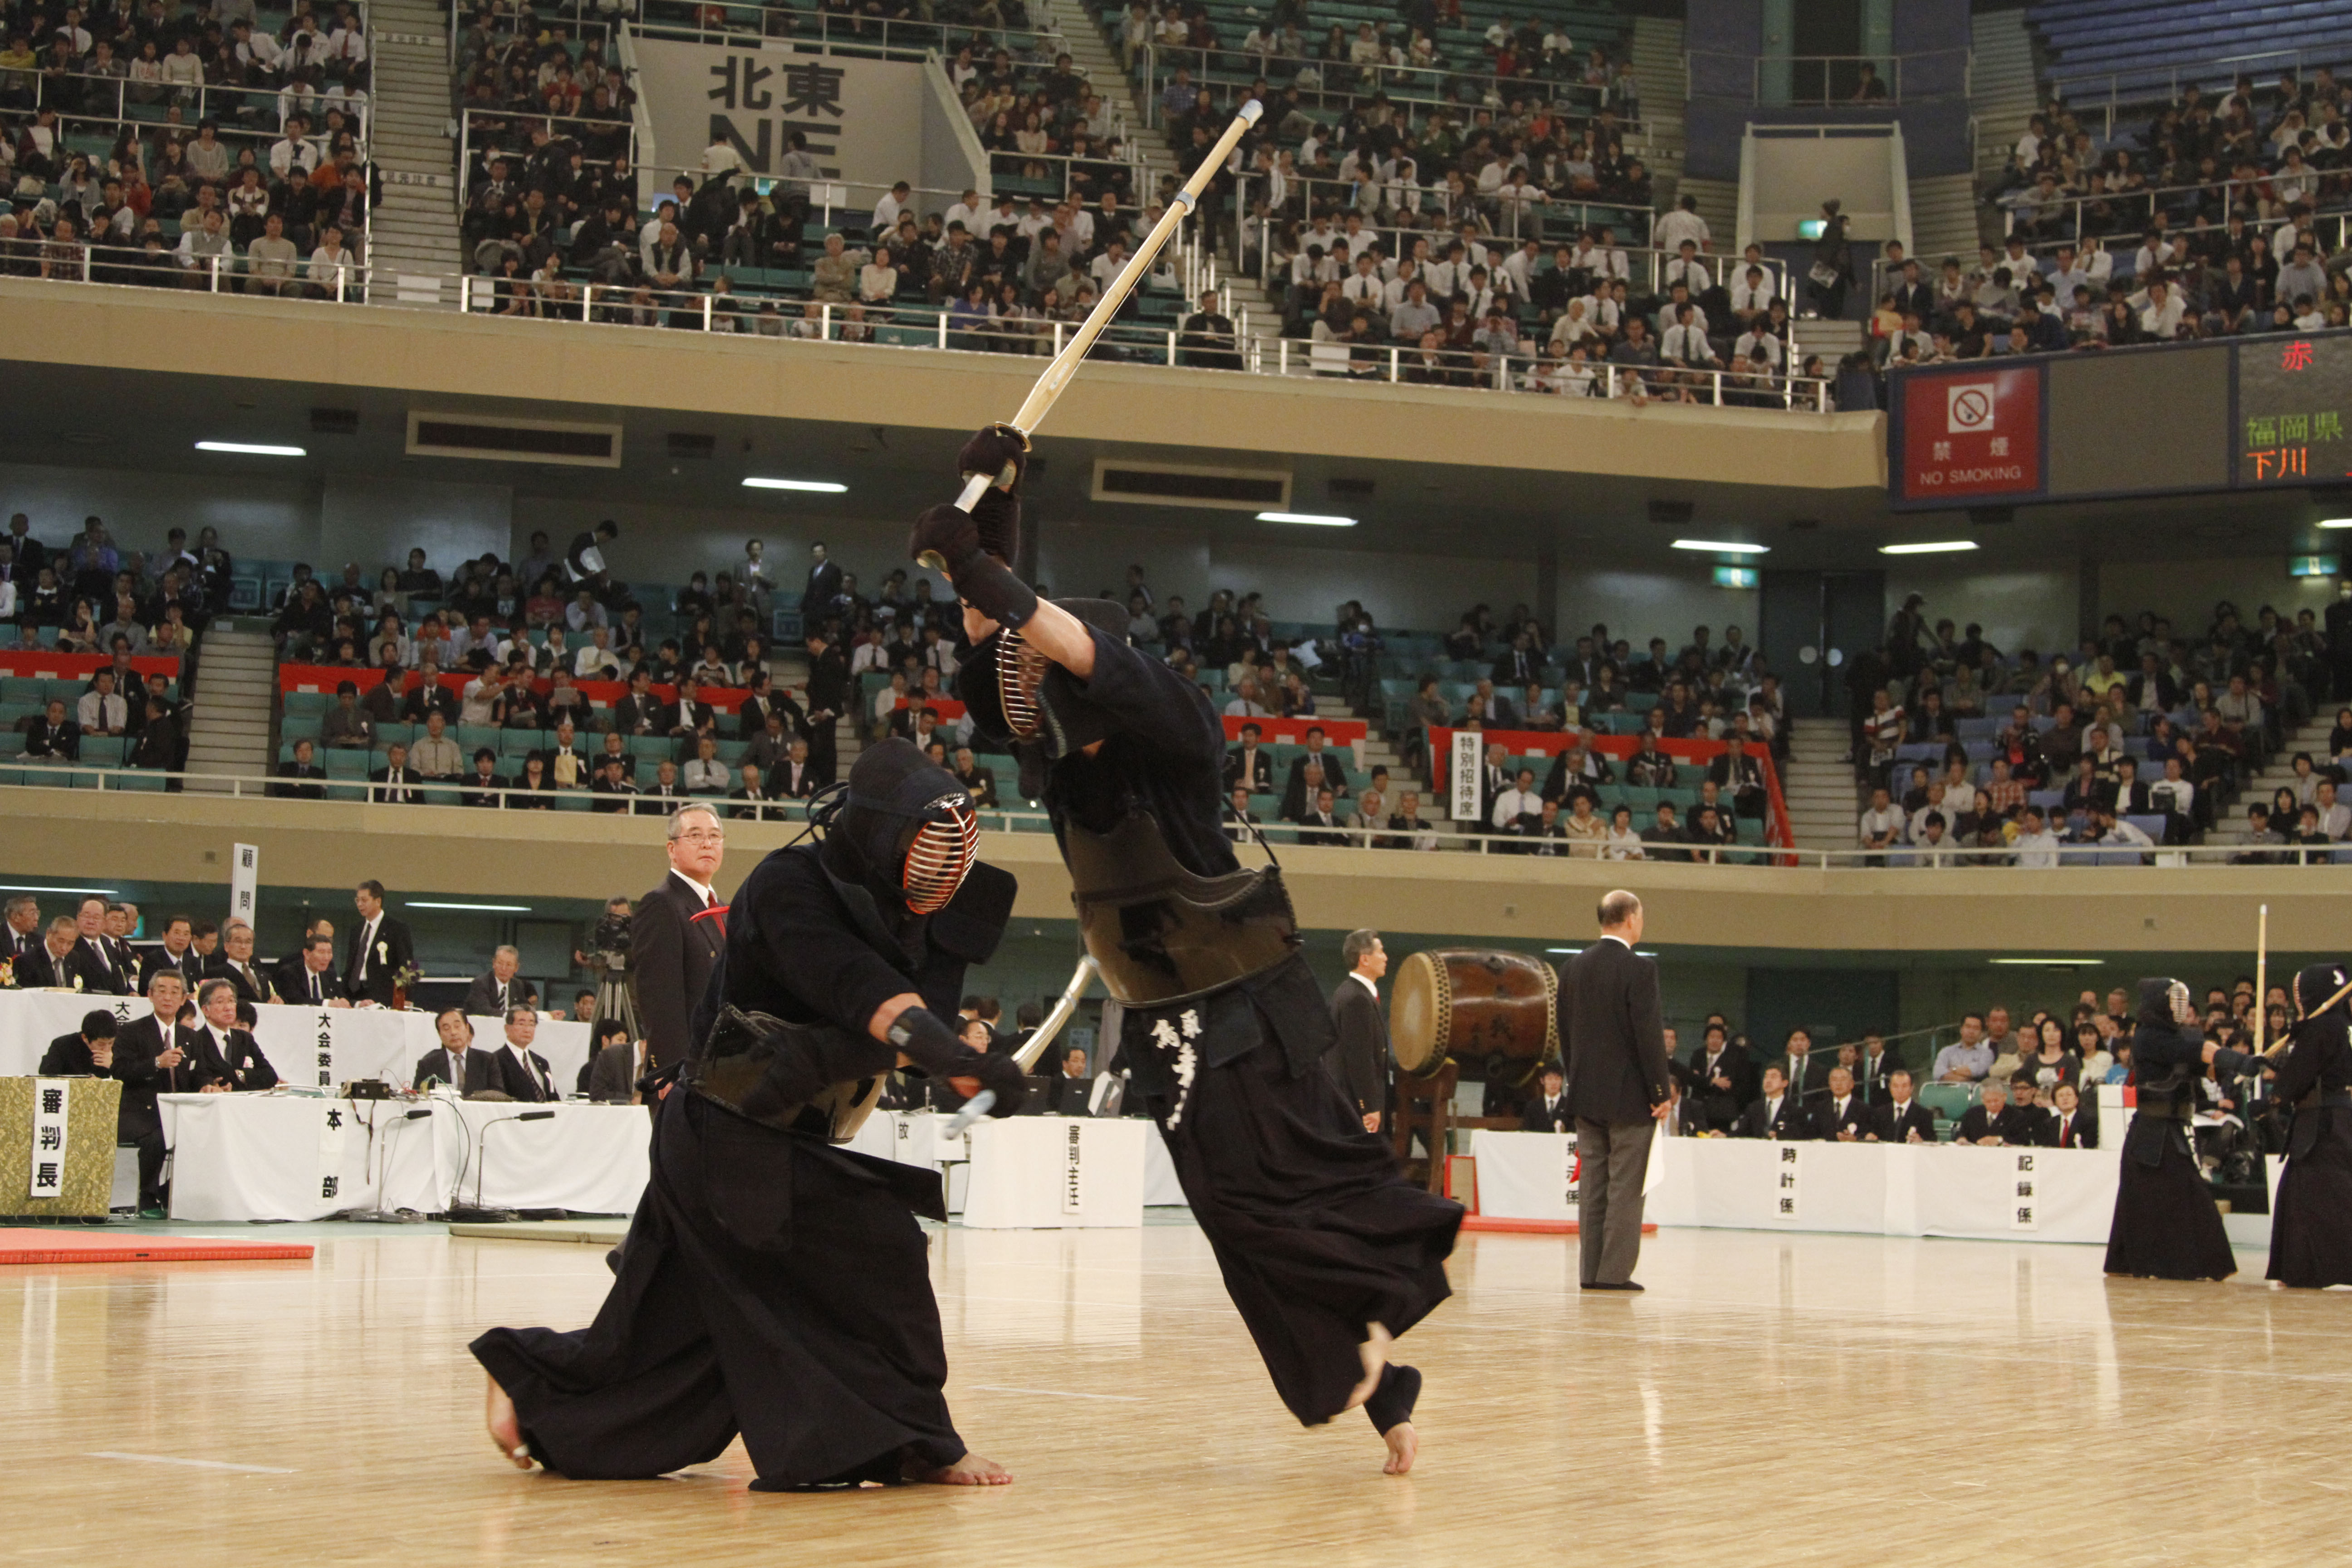 Revered art: Competitors clash at the All Japan Kendo Championship at the Budokan in Tokyo. | COURTESY OF KENDO WORLD MAGAZINE